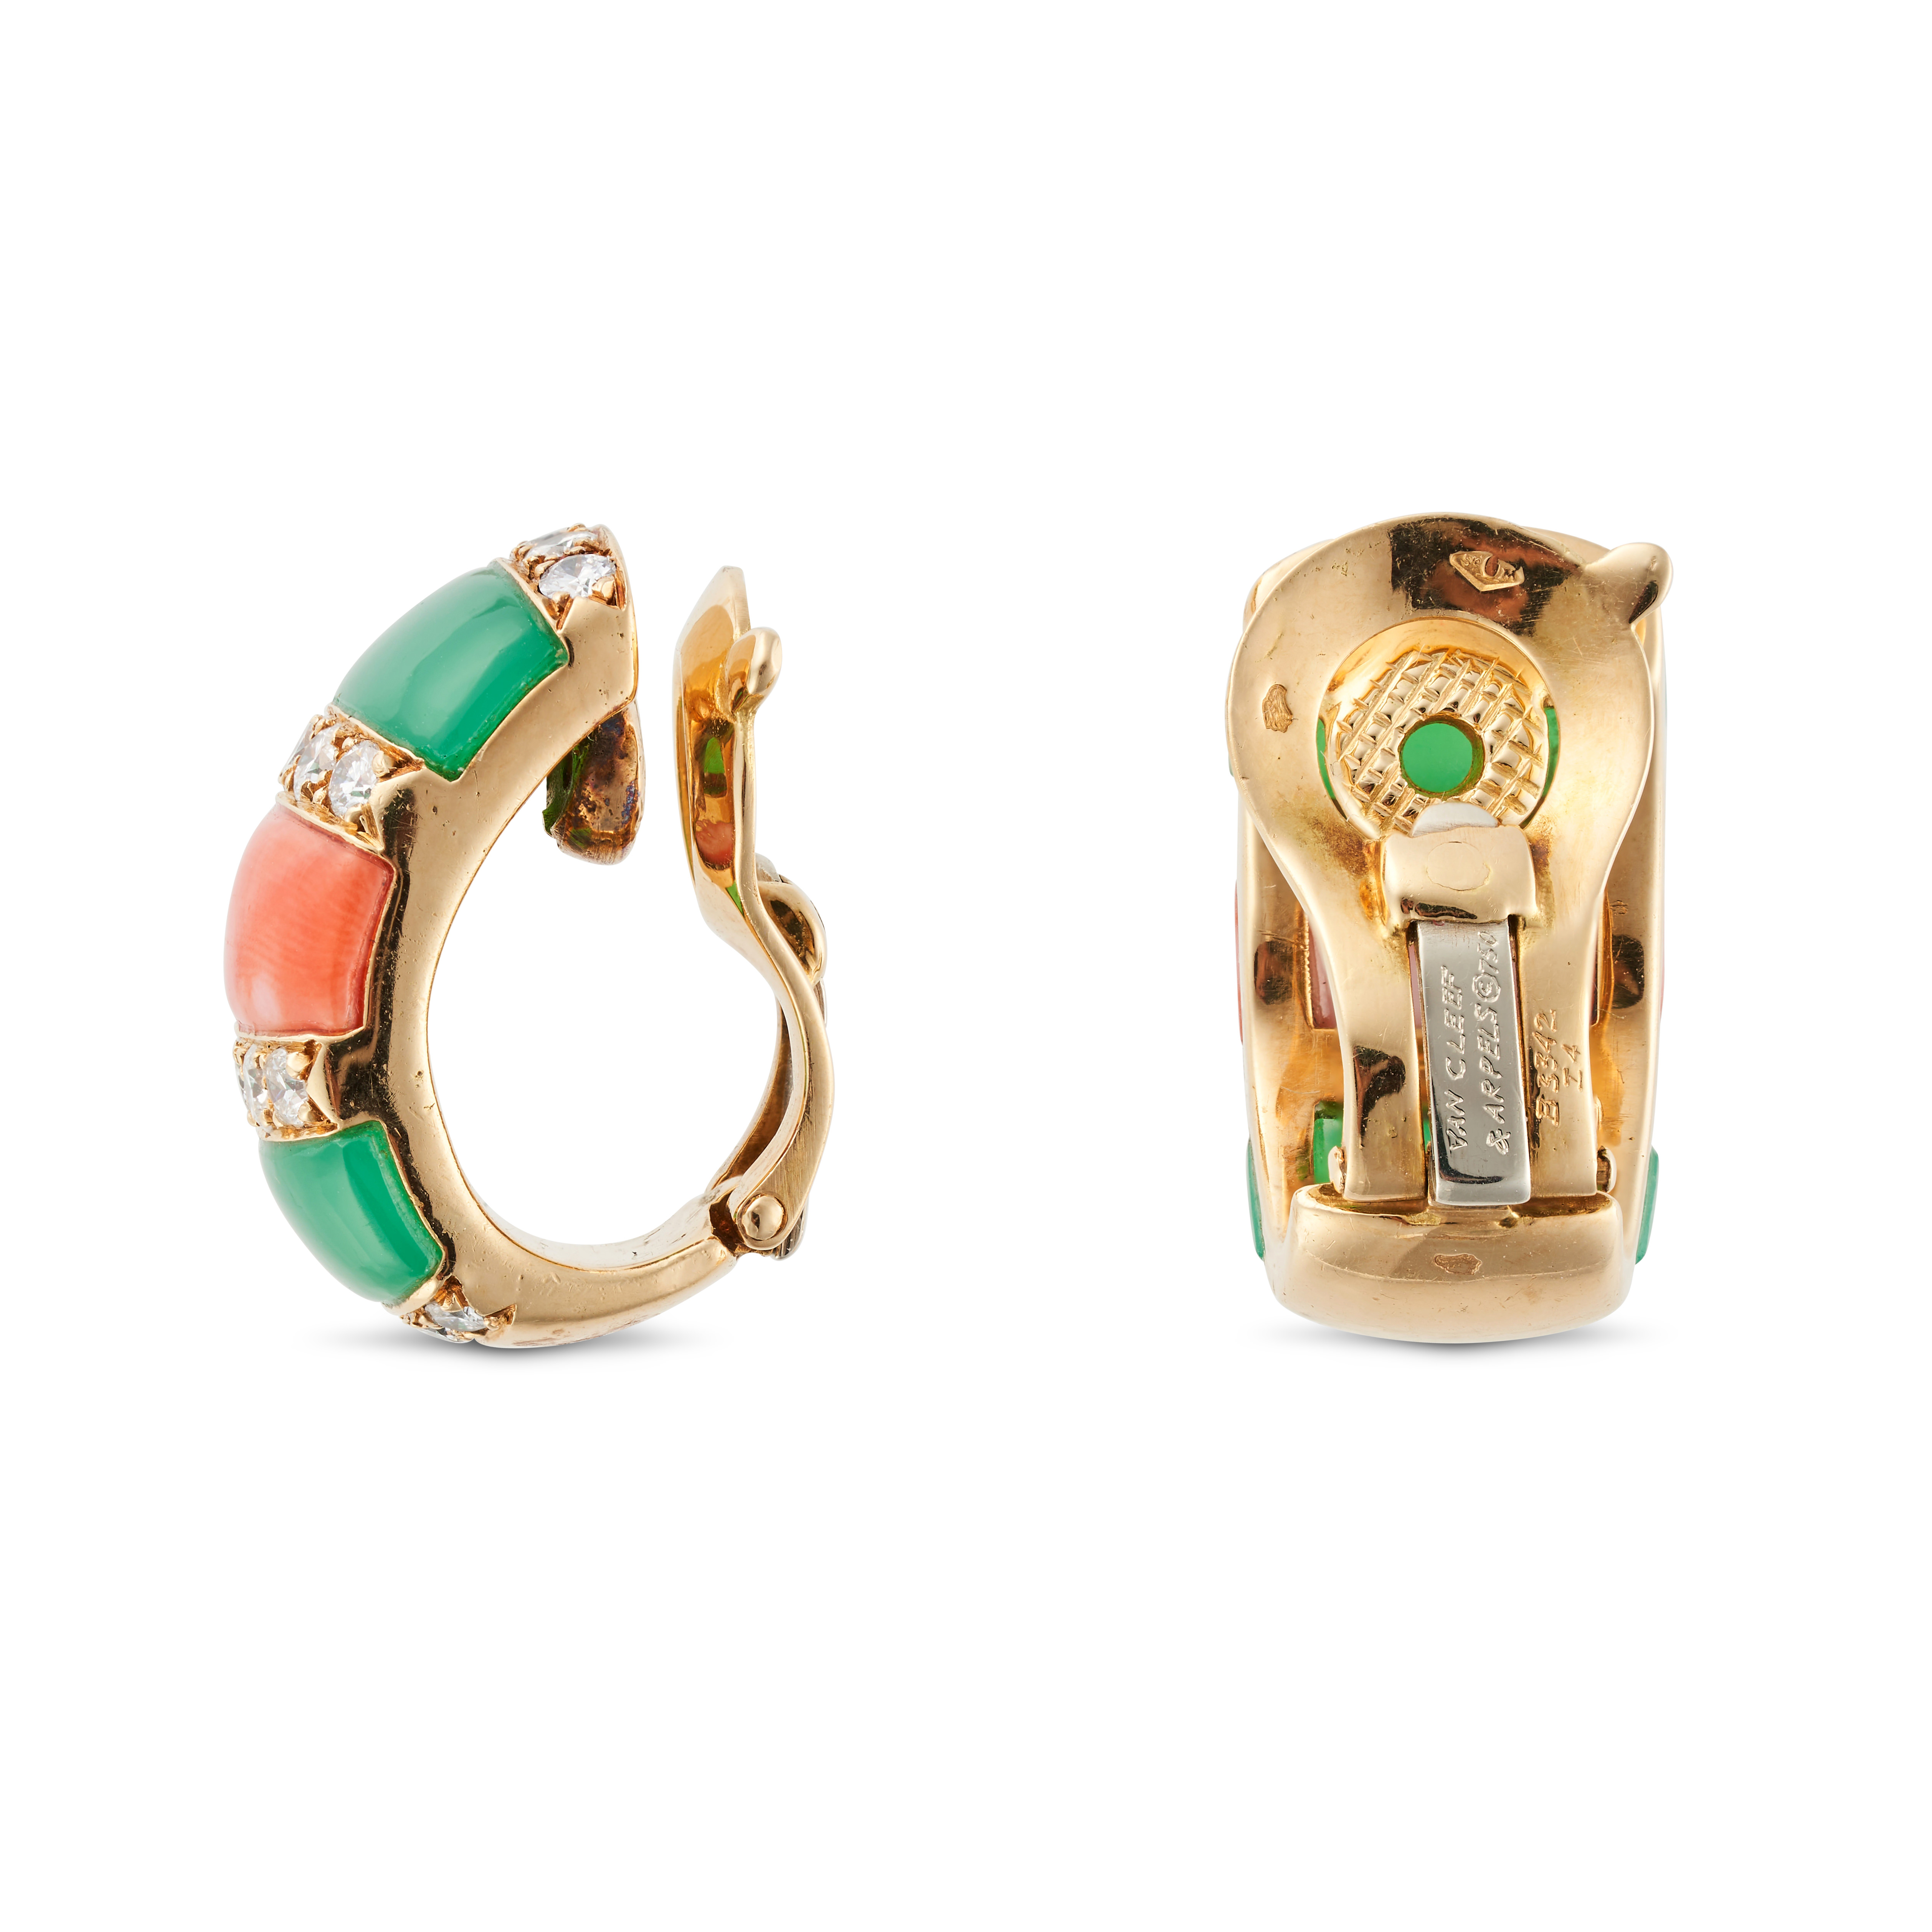 VAN CLEEF & ARPELS, A PAIR OF CORAL, CHRYSOPRASE AND DIAMOND CLIP EARRINGS in 18ct yellow gold, e... - Image 2 of 2